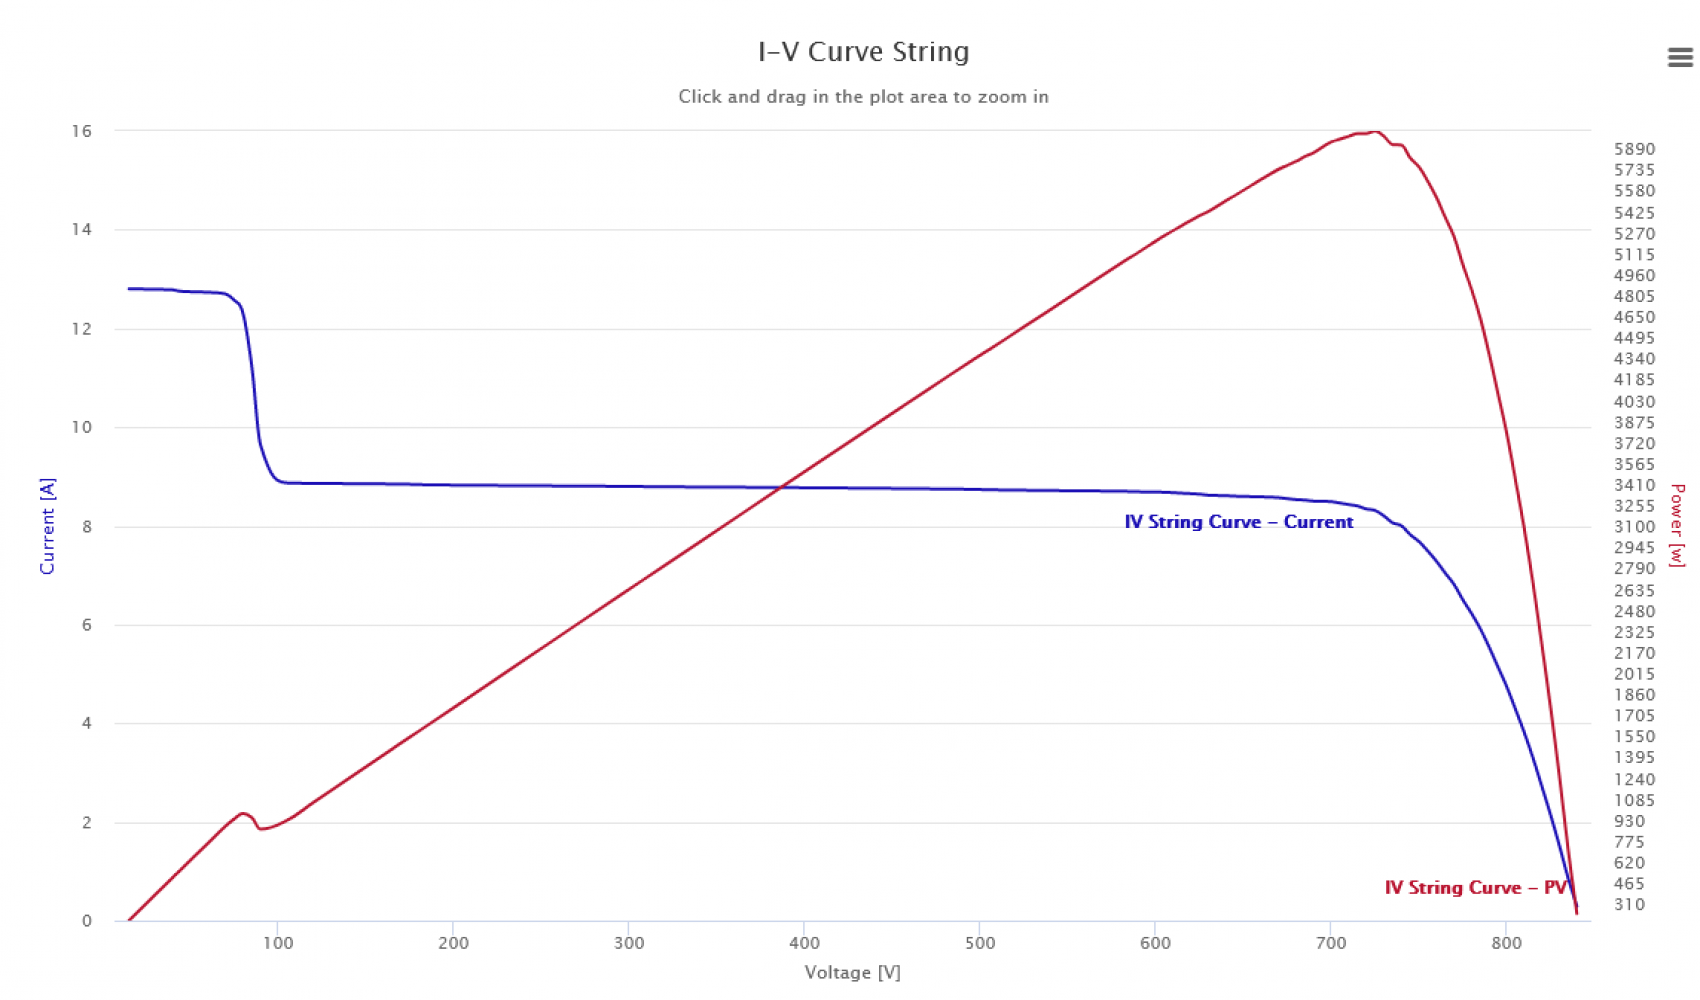 Improving the efficiency thanks to the thorough analysis of the IV curves